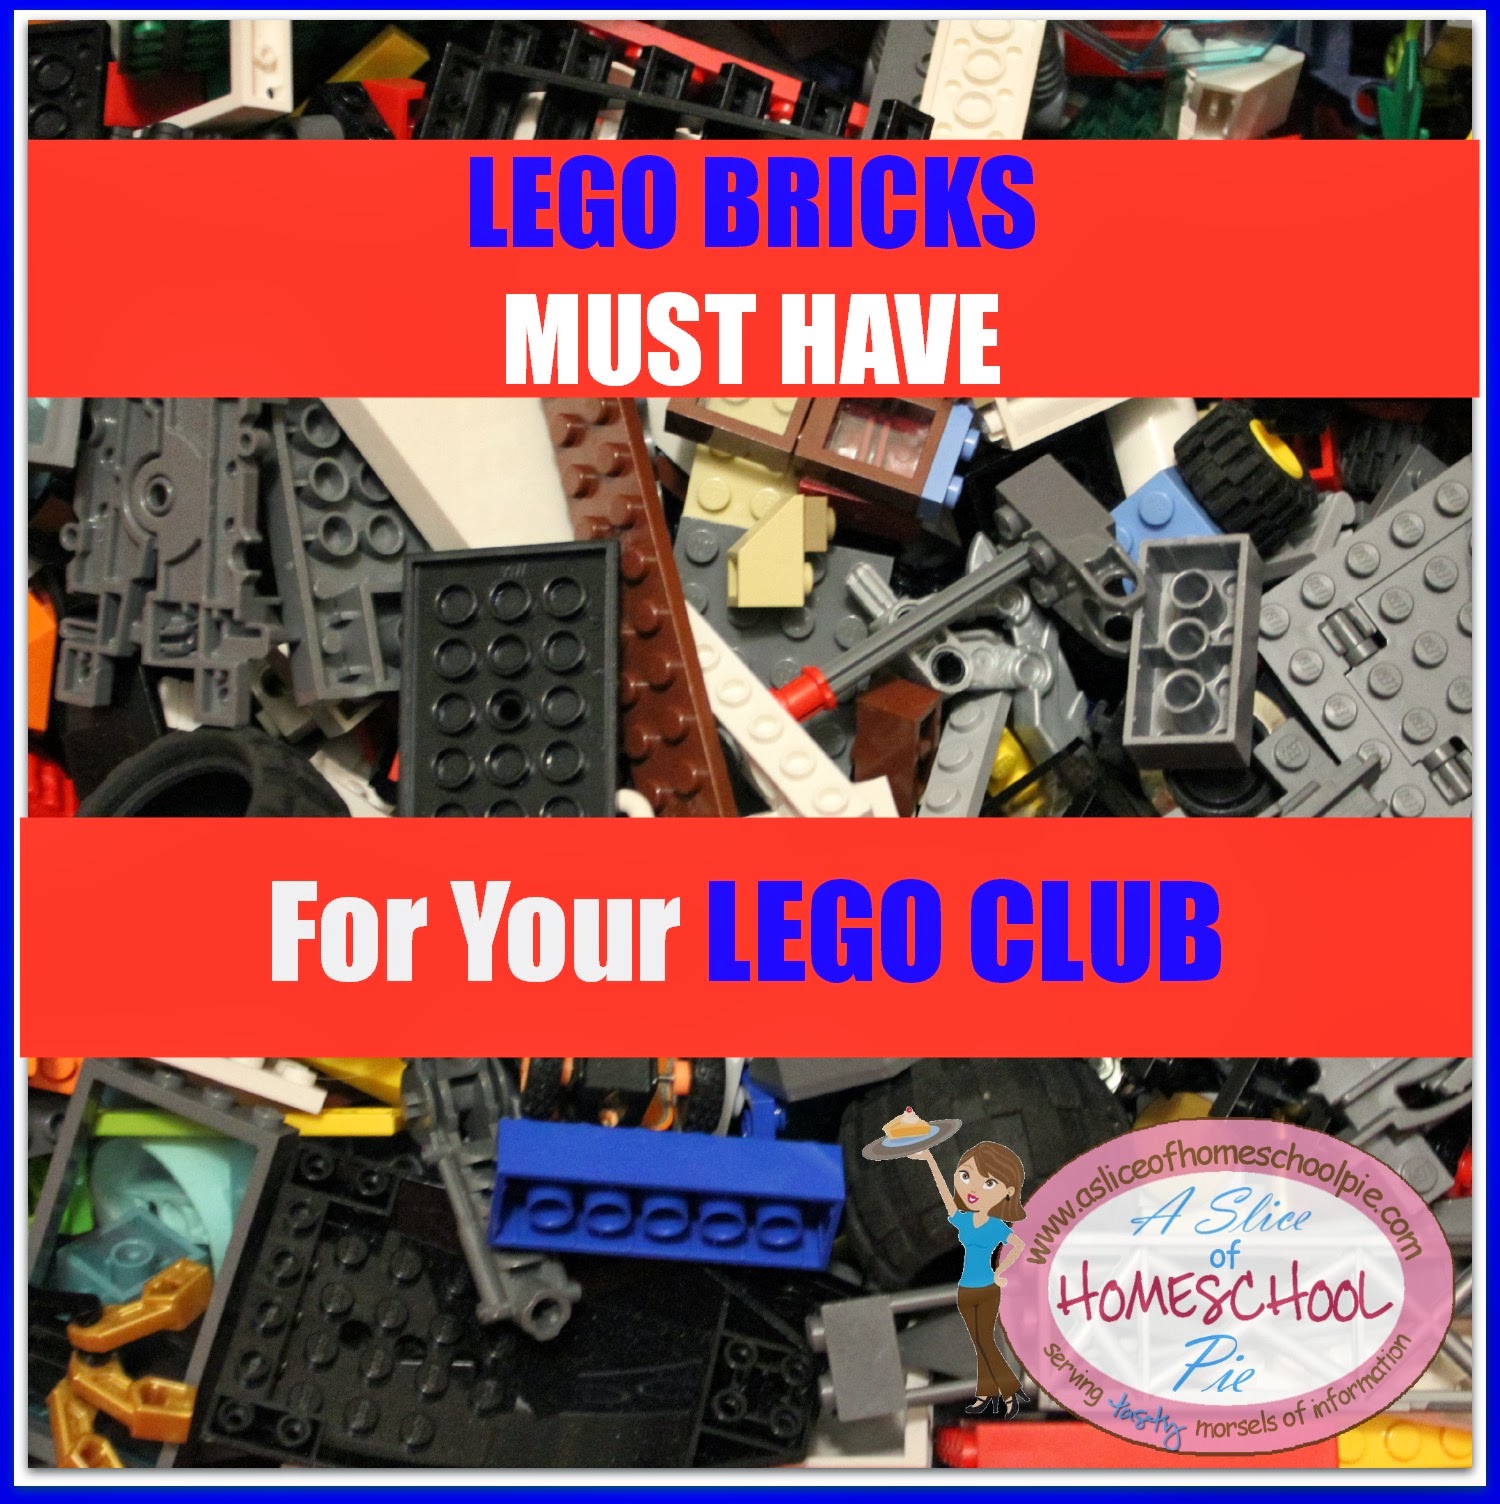 Lego Bricks Must Have for Your Lego Club by ASliceOfHomeschoolPie.com